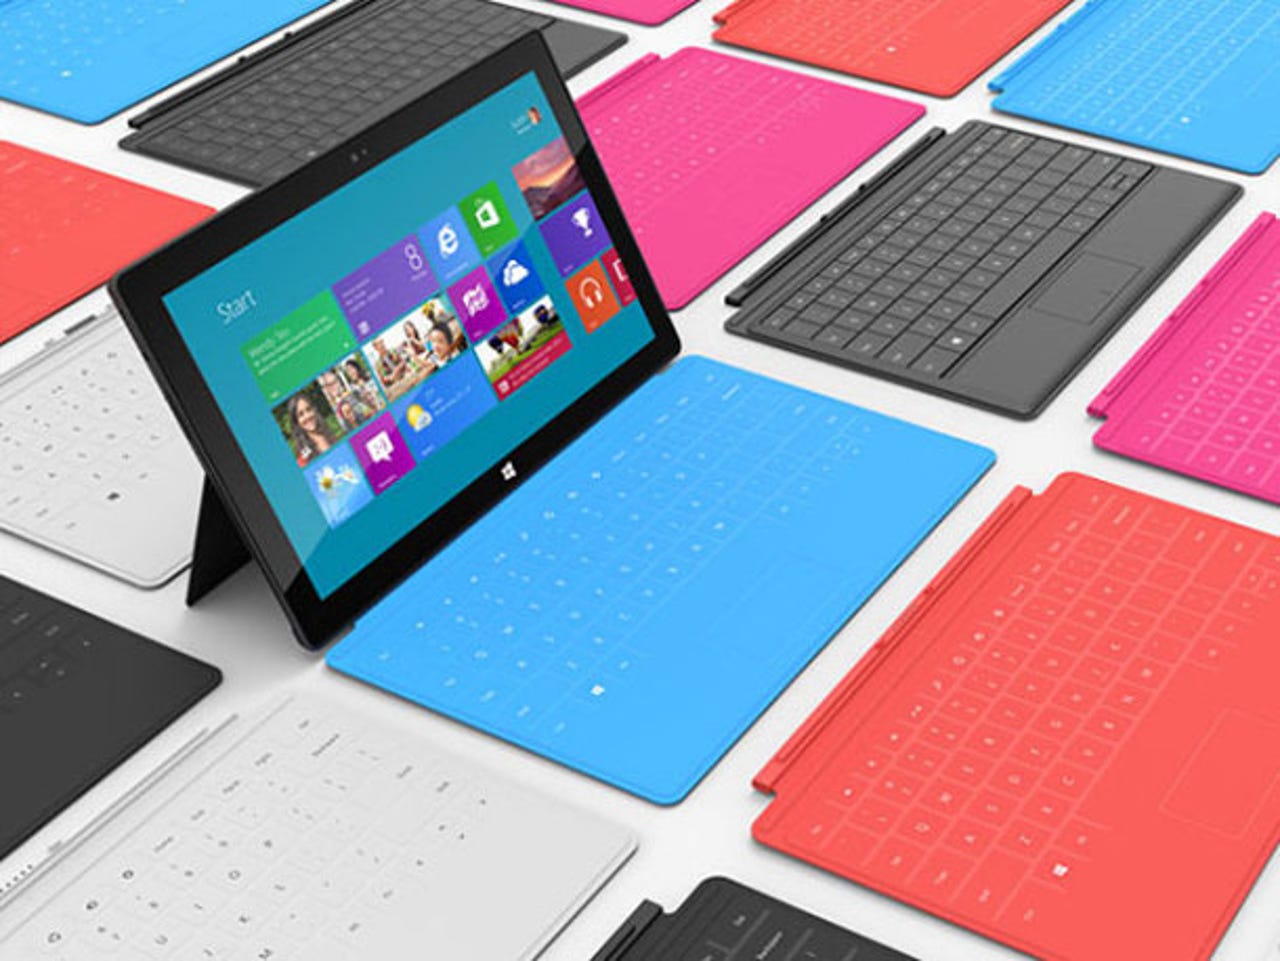 MSFT Surface tablet